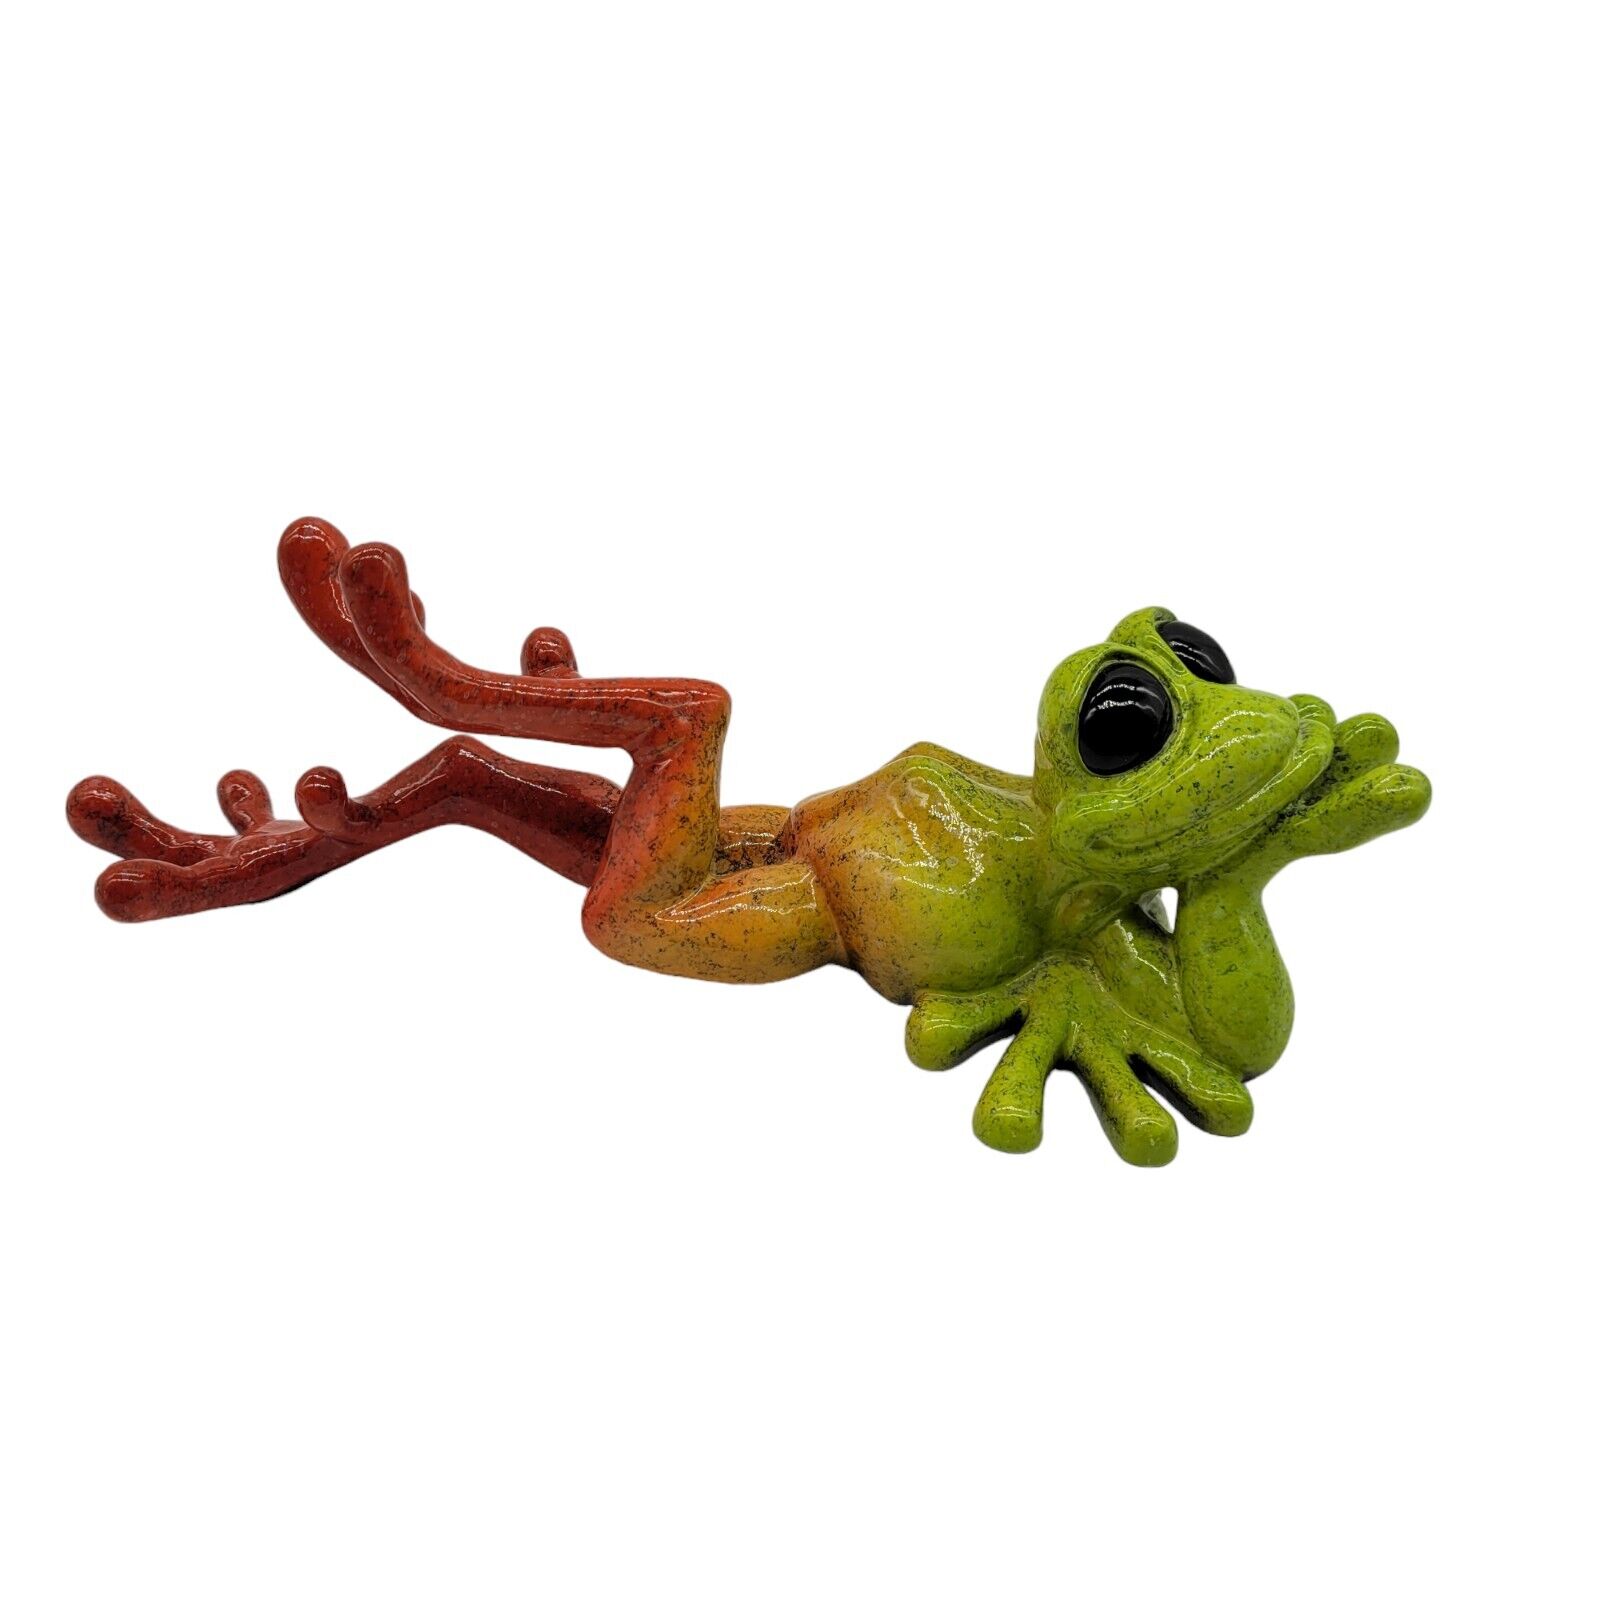 Kitty's Critters DayDreams Frog Whimsical Sculpture tree Frog 2006 Retired 